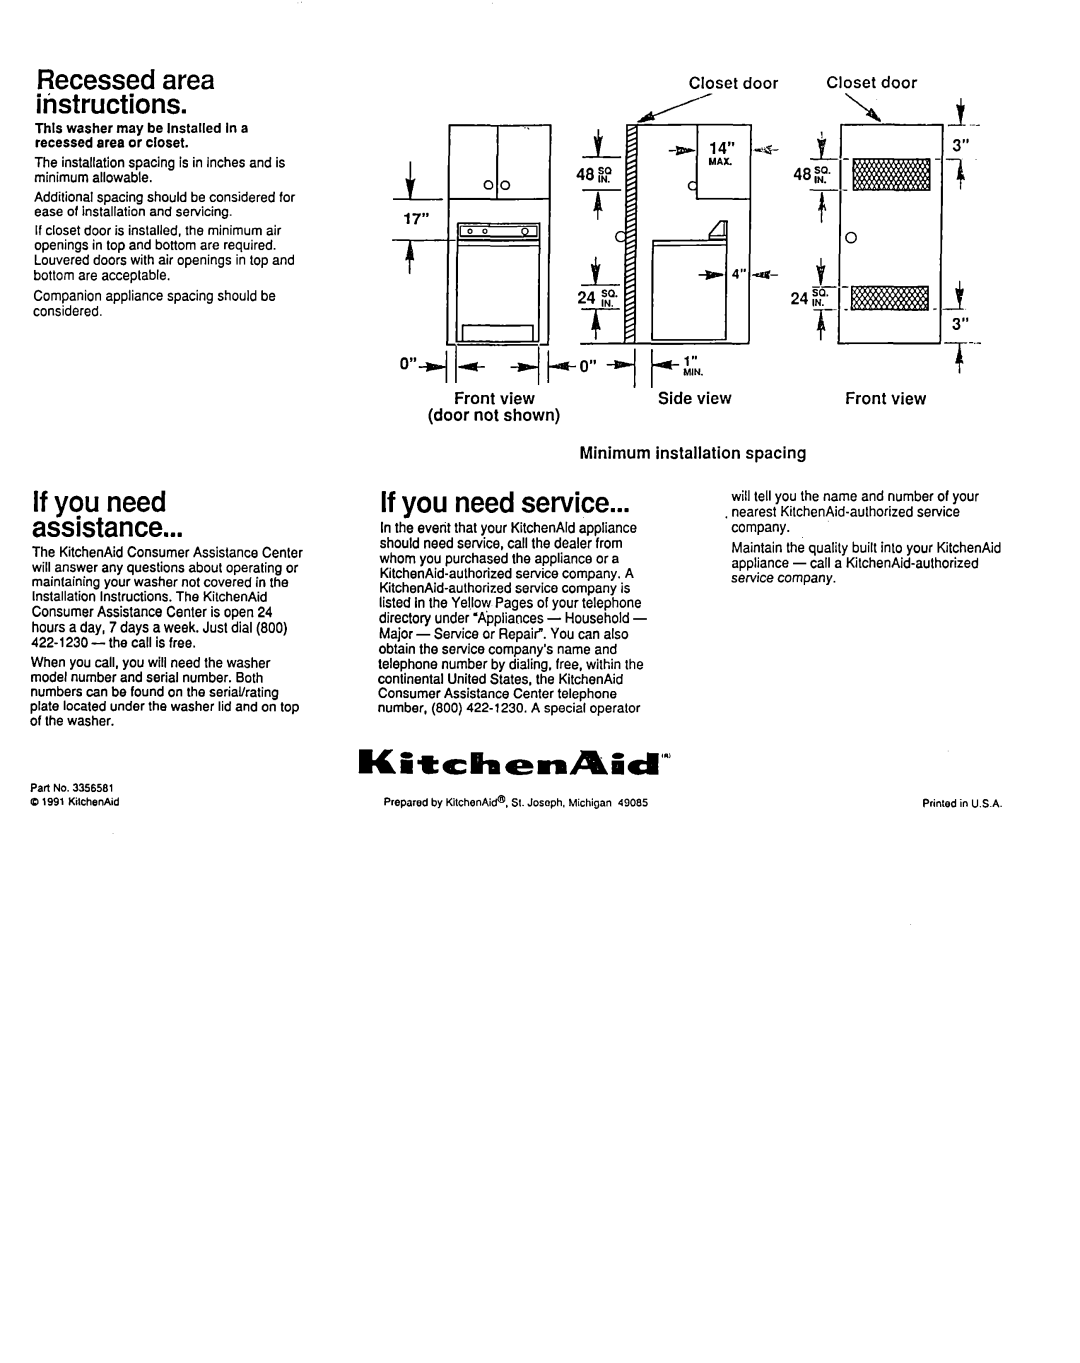 KitchenAid Washer installation instructions If you need assistance, If you need service, Recessed area iristructions 